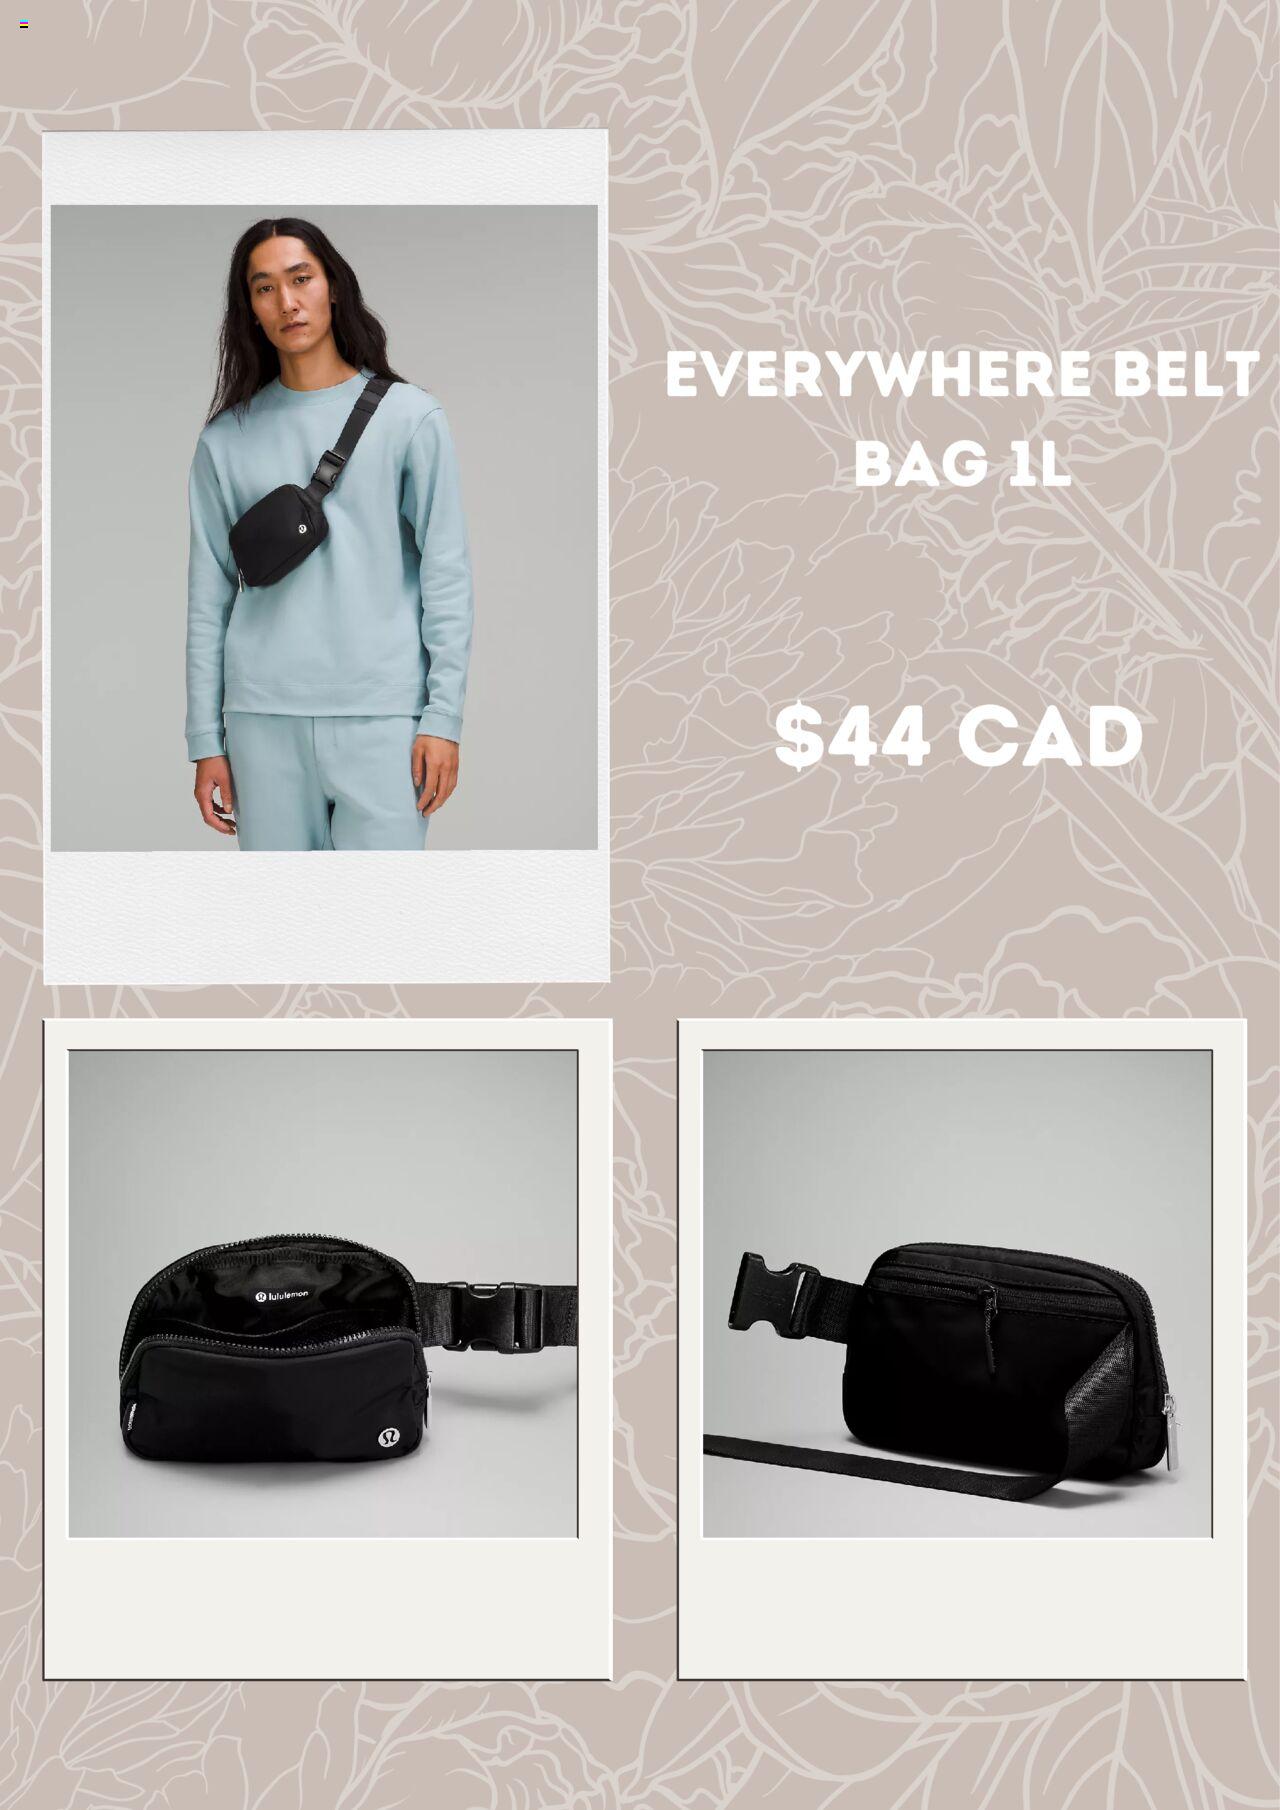 Lululemon - New Products Specials - Page 3